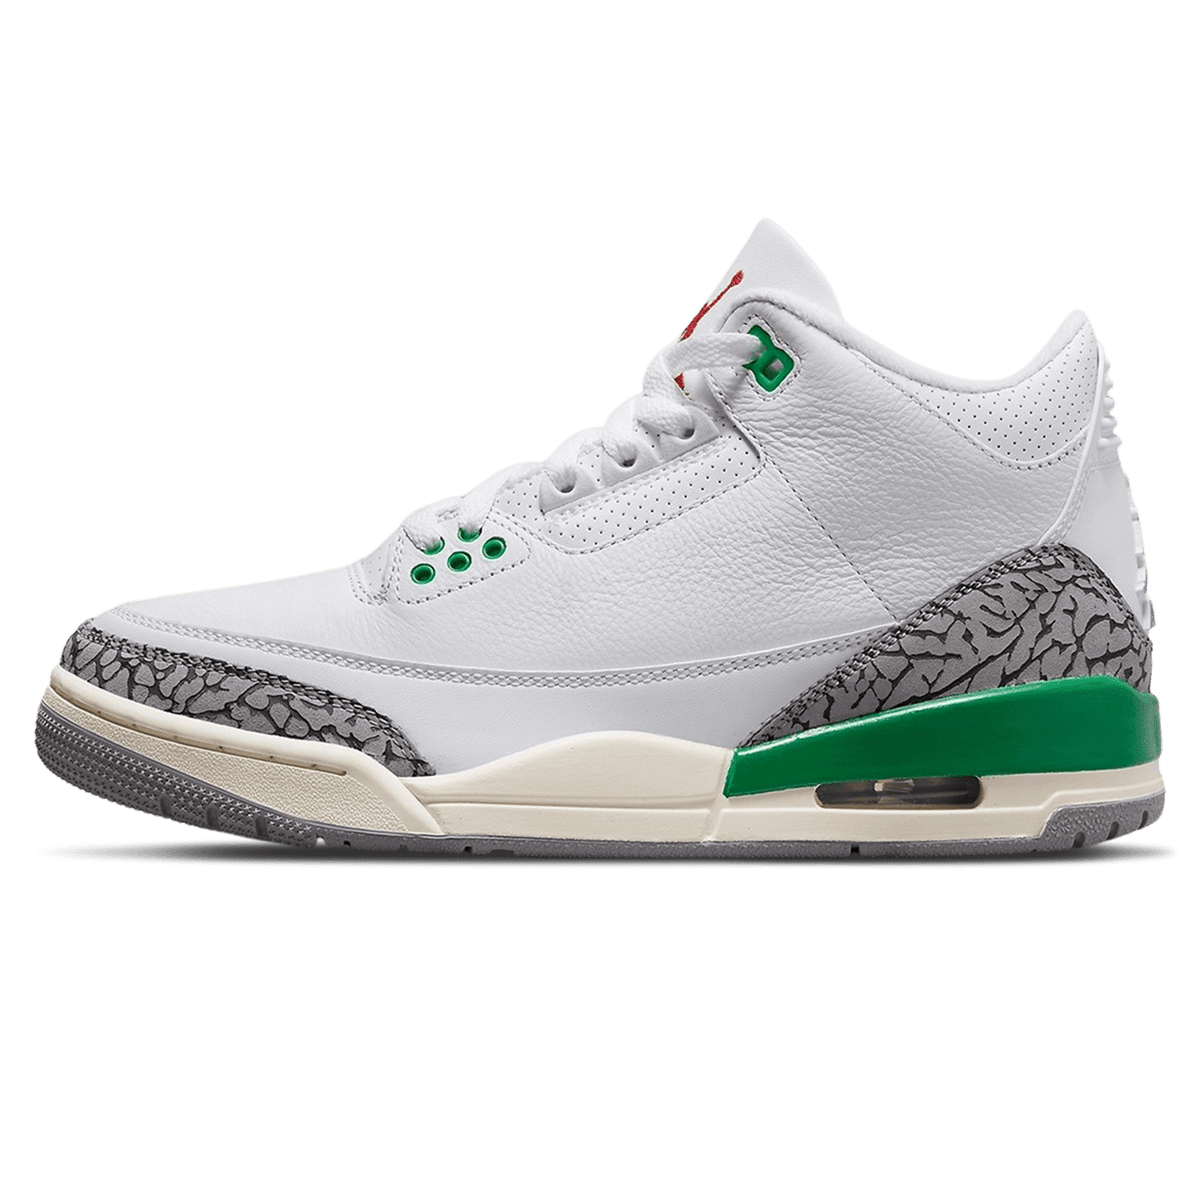 You may recall rare PE that surfaced earlier week during Jordan Brands Retro Wmns 'Lucky Green' - CerbeShops